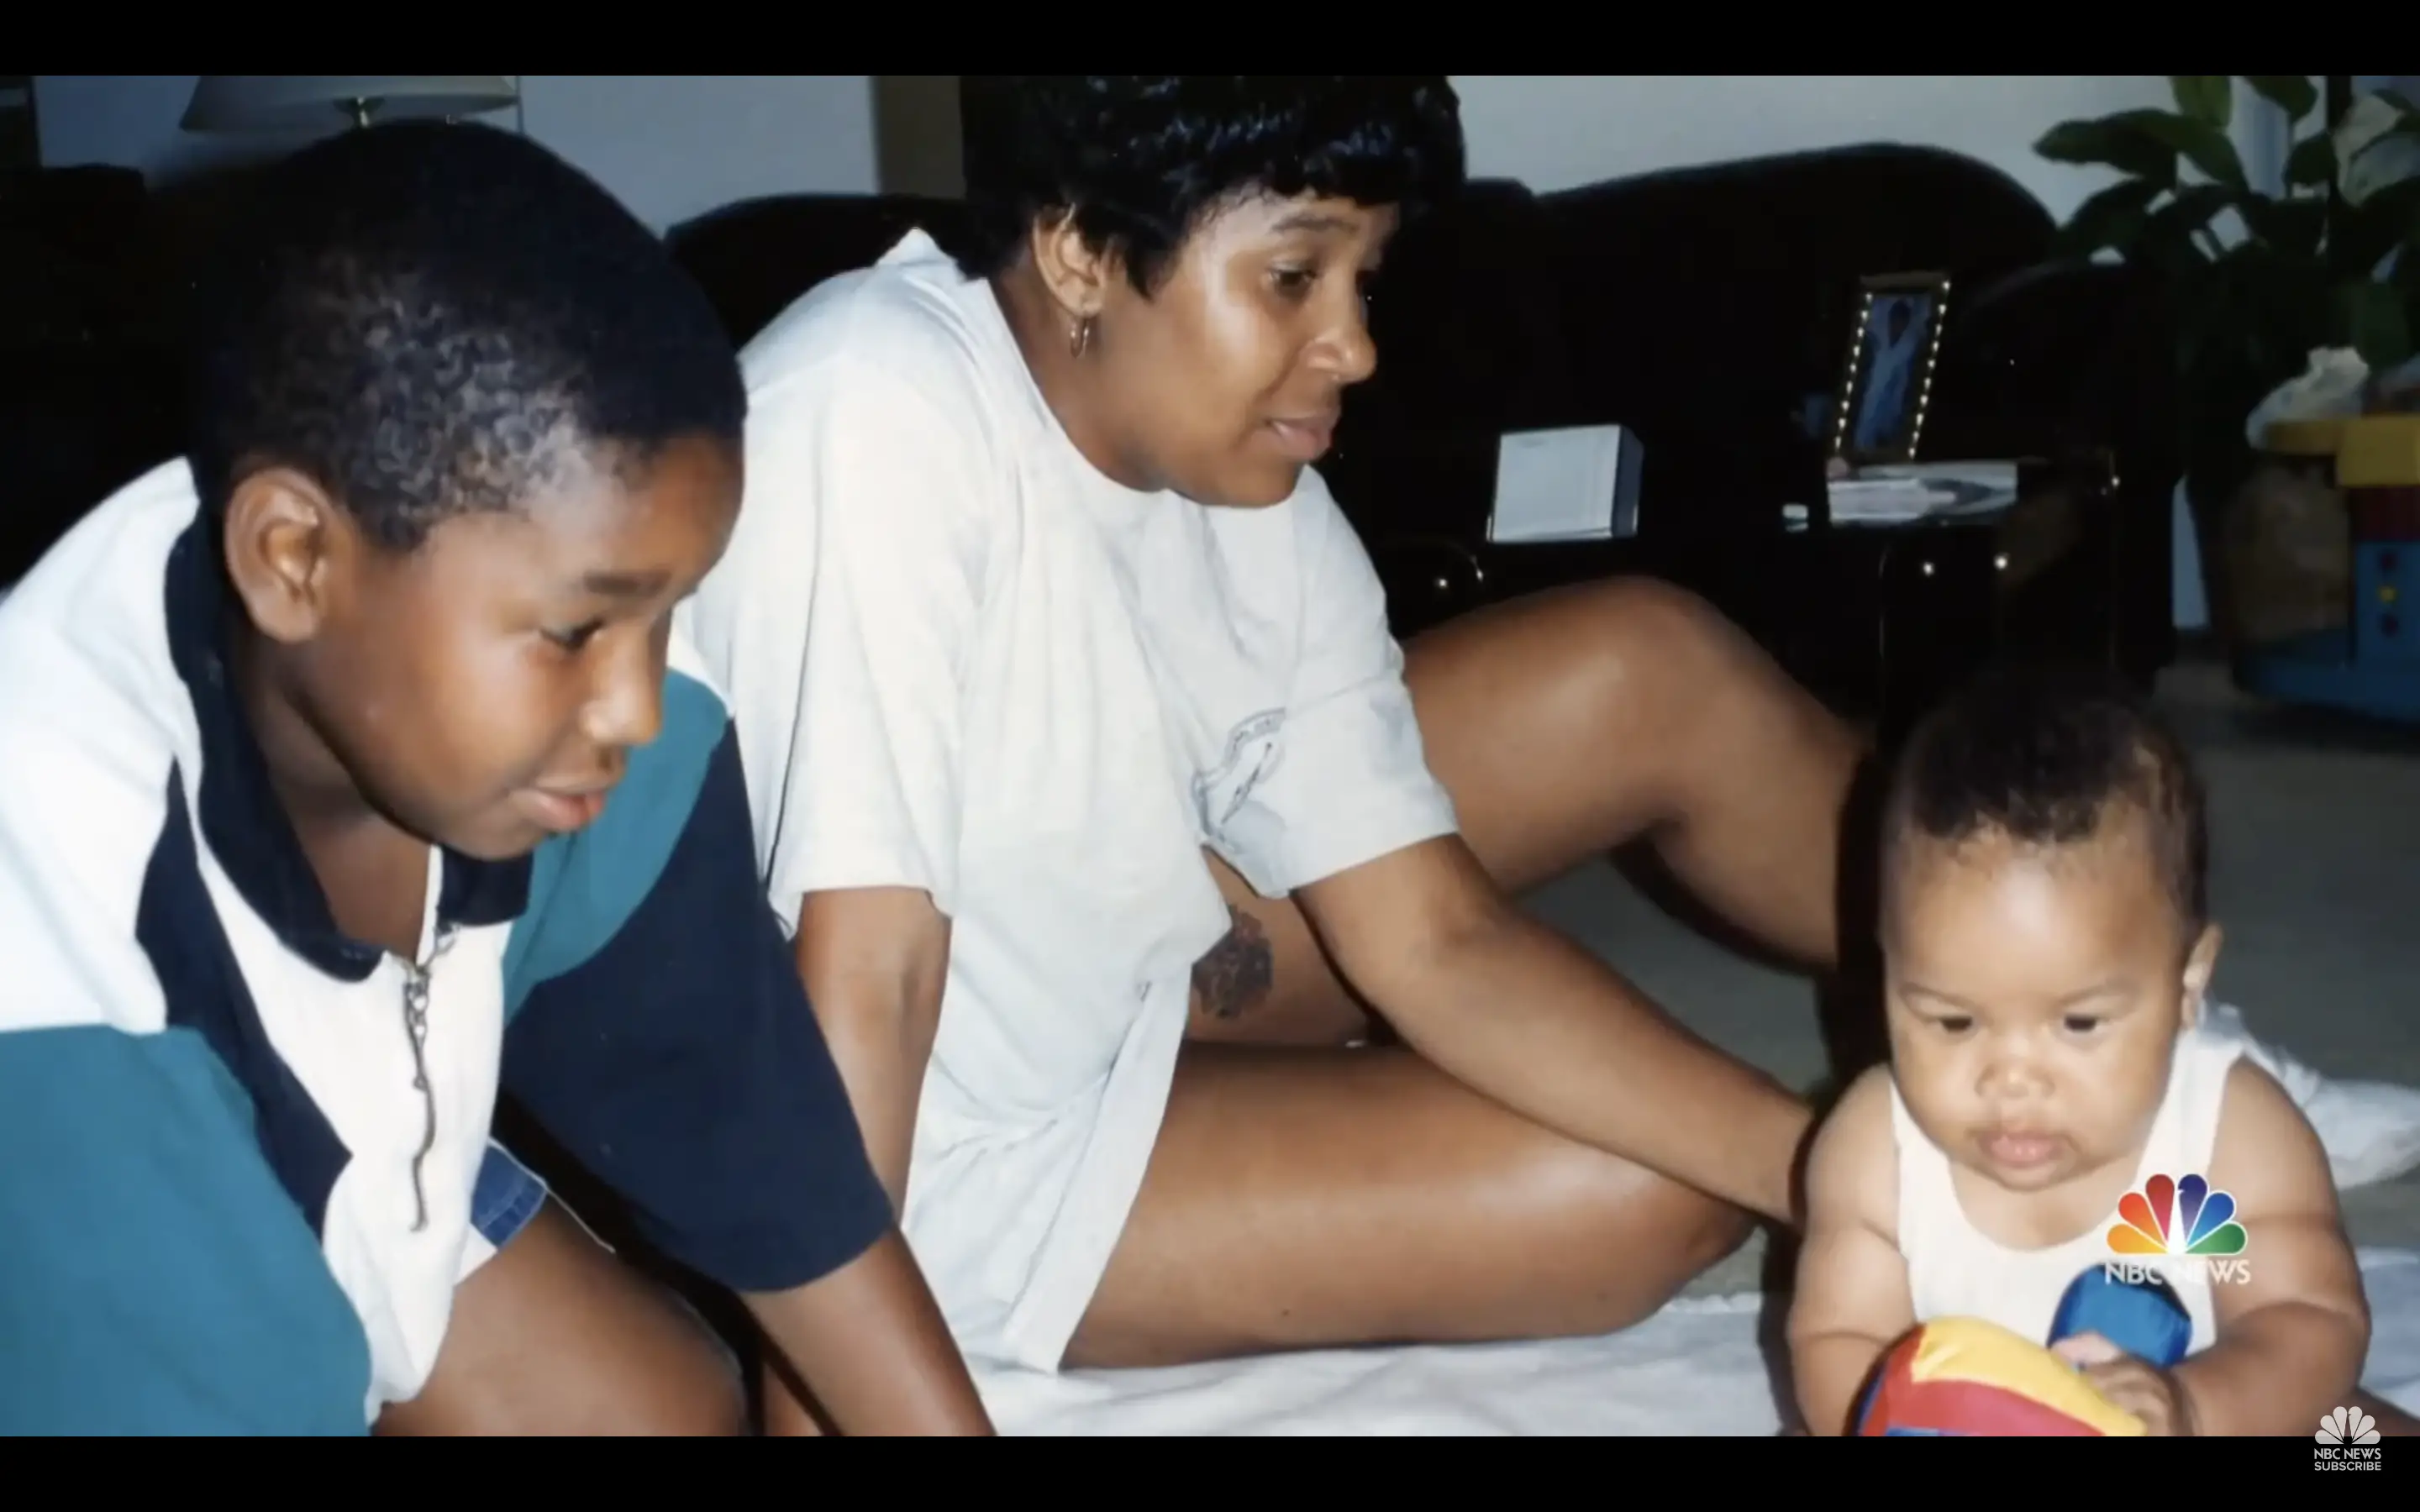 CeeCee Ross-Lyles and her sons Jerome and Jevon | Source: youtube.com/@NBCNews